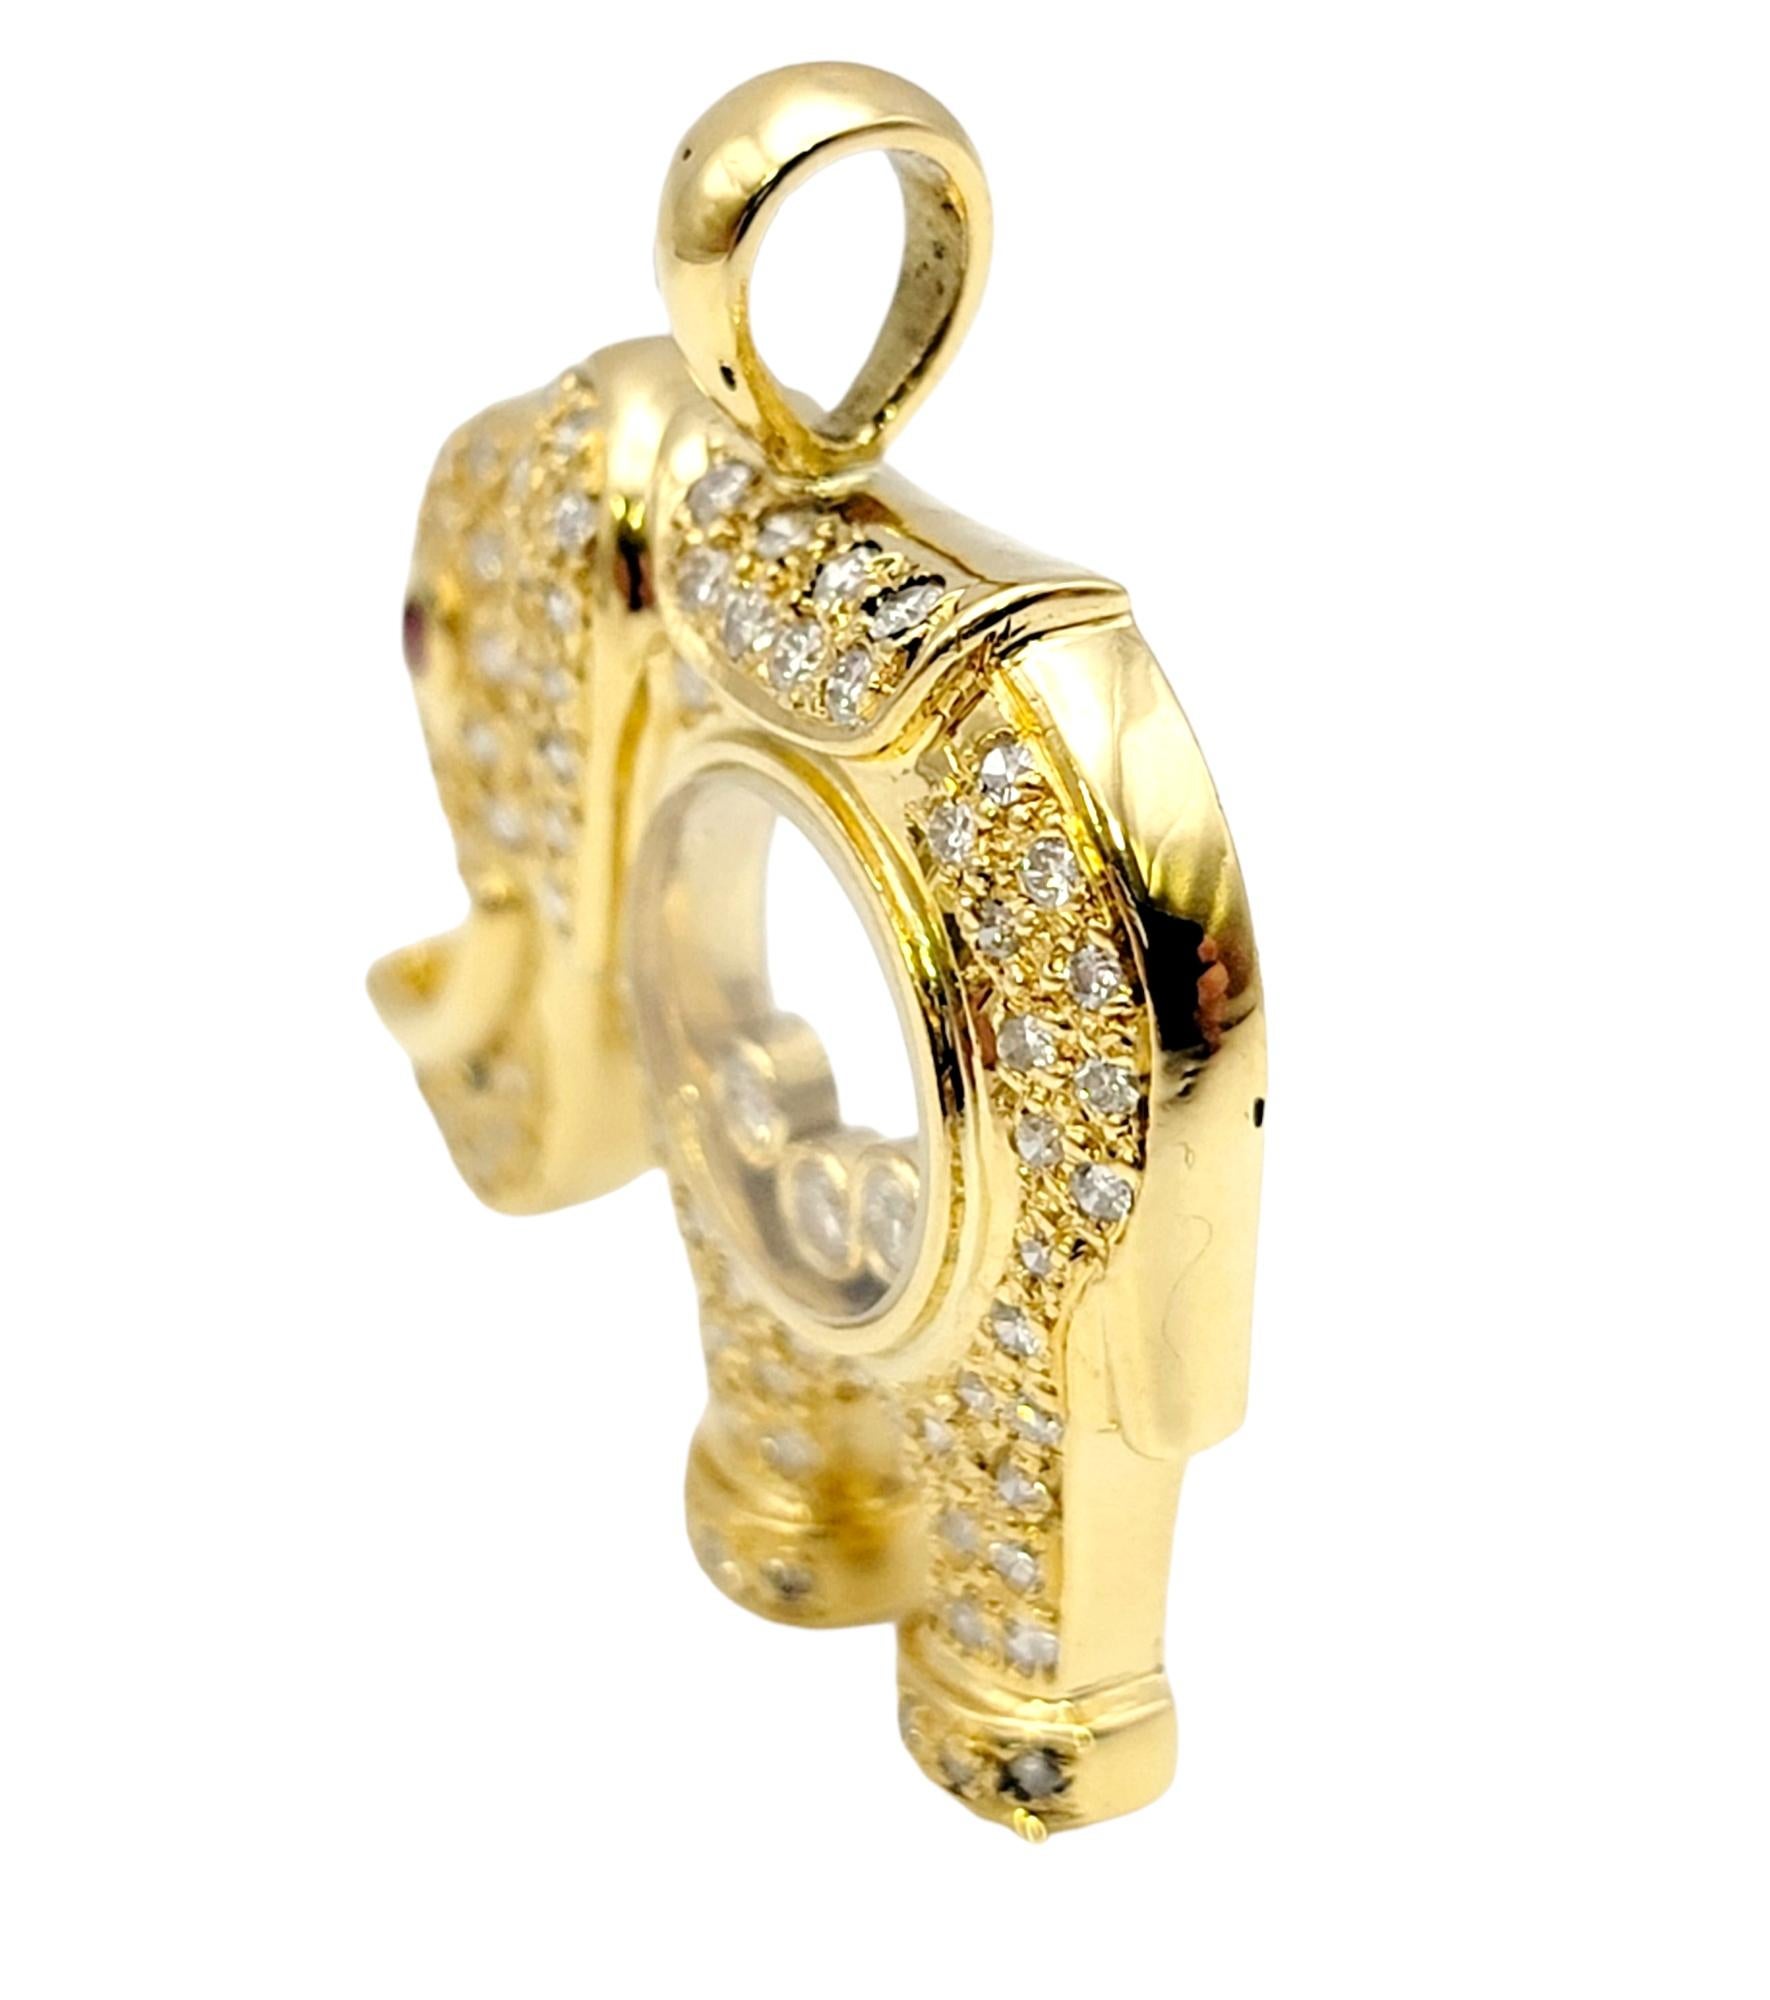 Contemporary Floating Diamond and Pave Elephant Pendant with Ruby Eye in 18 Karat Yellow Gold